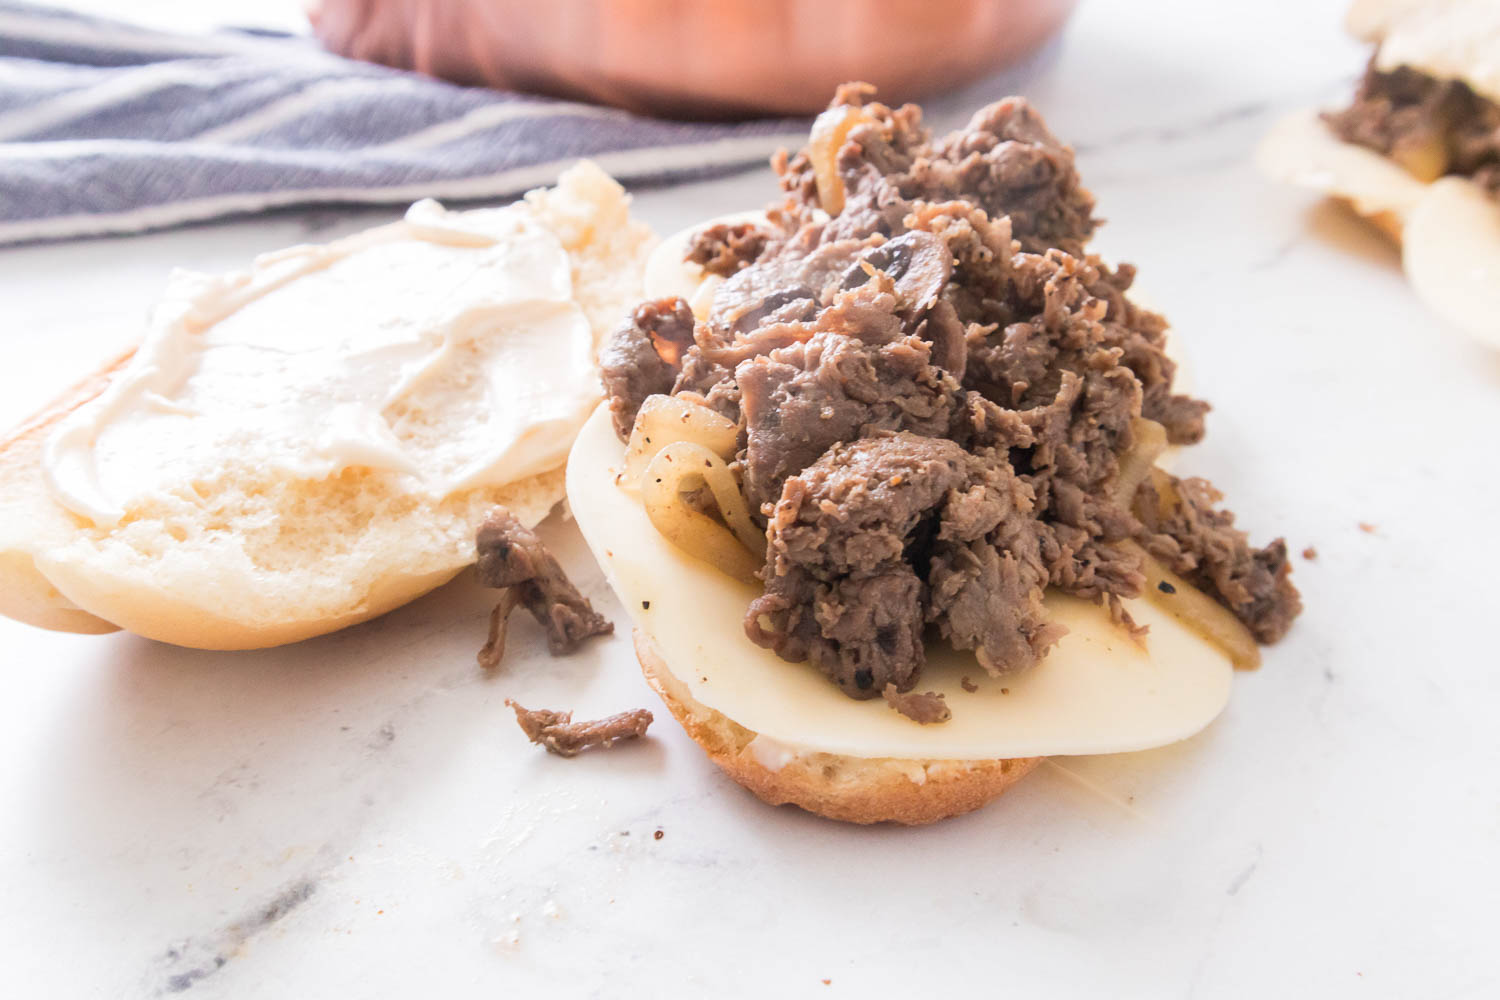 There's nothing quite like a Philly cheesesteak. Thin slices of steak, melted cheese, and onions grilled to perfection on a fresh roll- it doesn't get much better than that. And while you can find variations of this sandwich all over the country, there's really nothing quite like the real thing from Philadelphia.